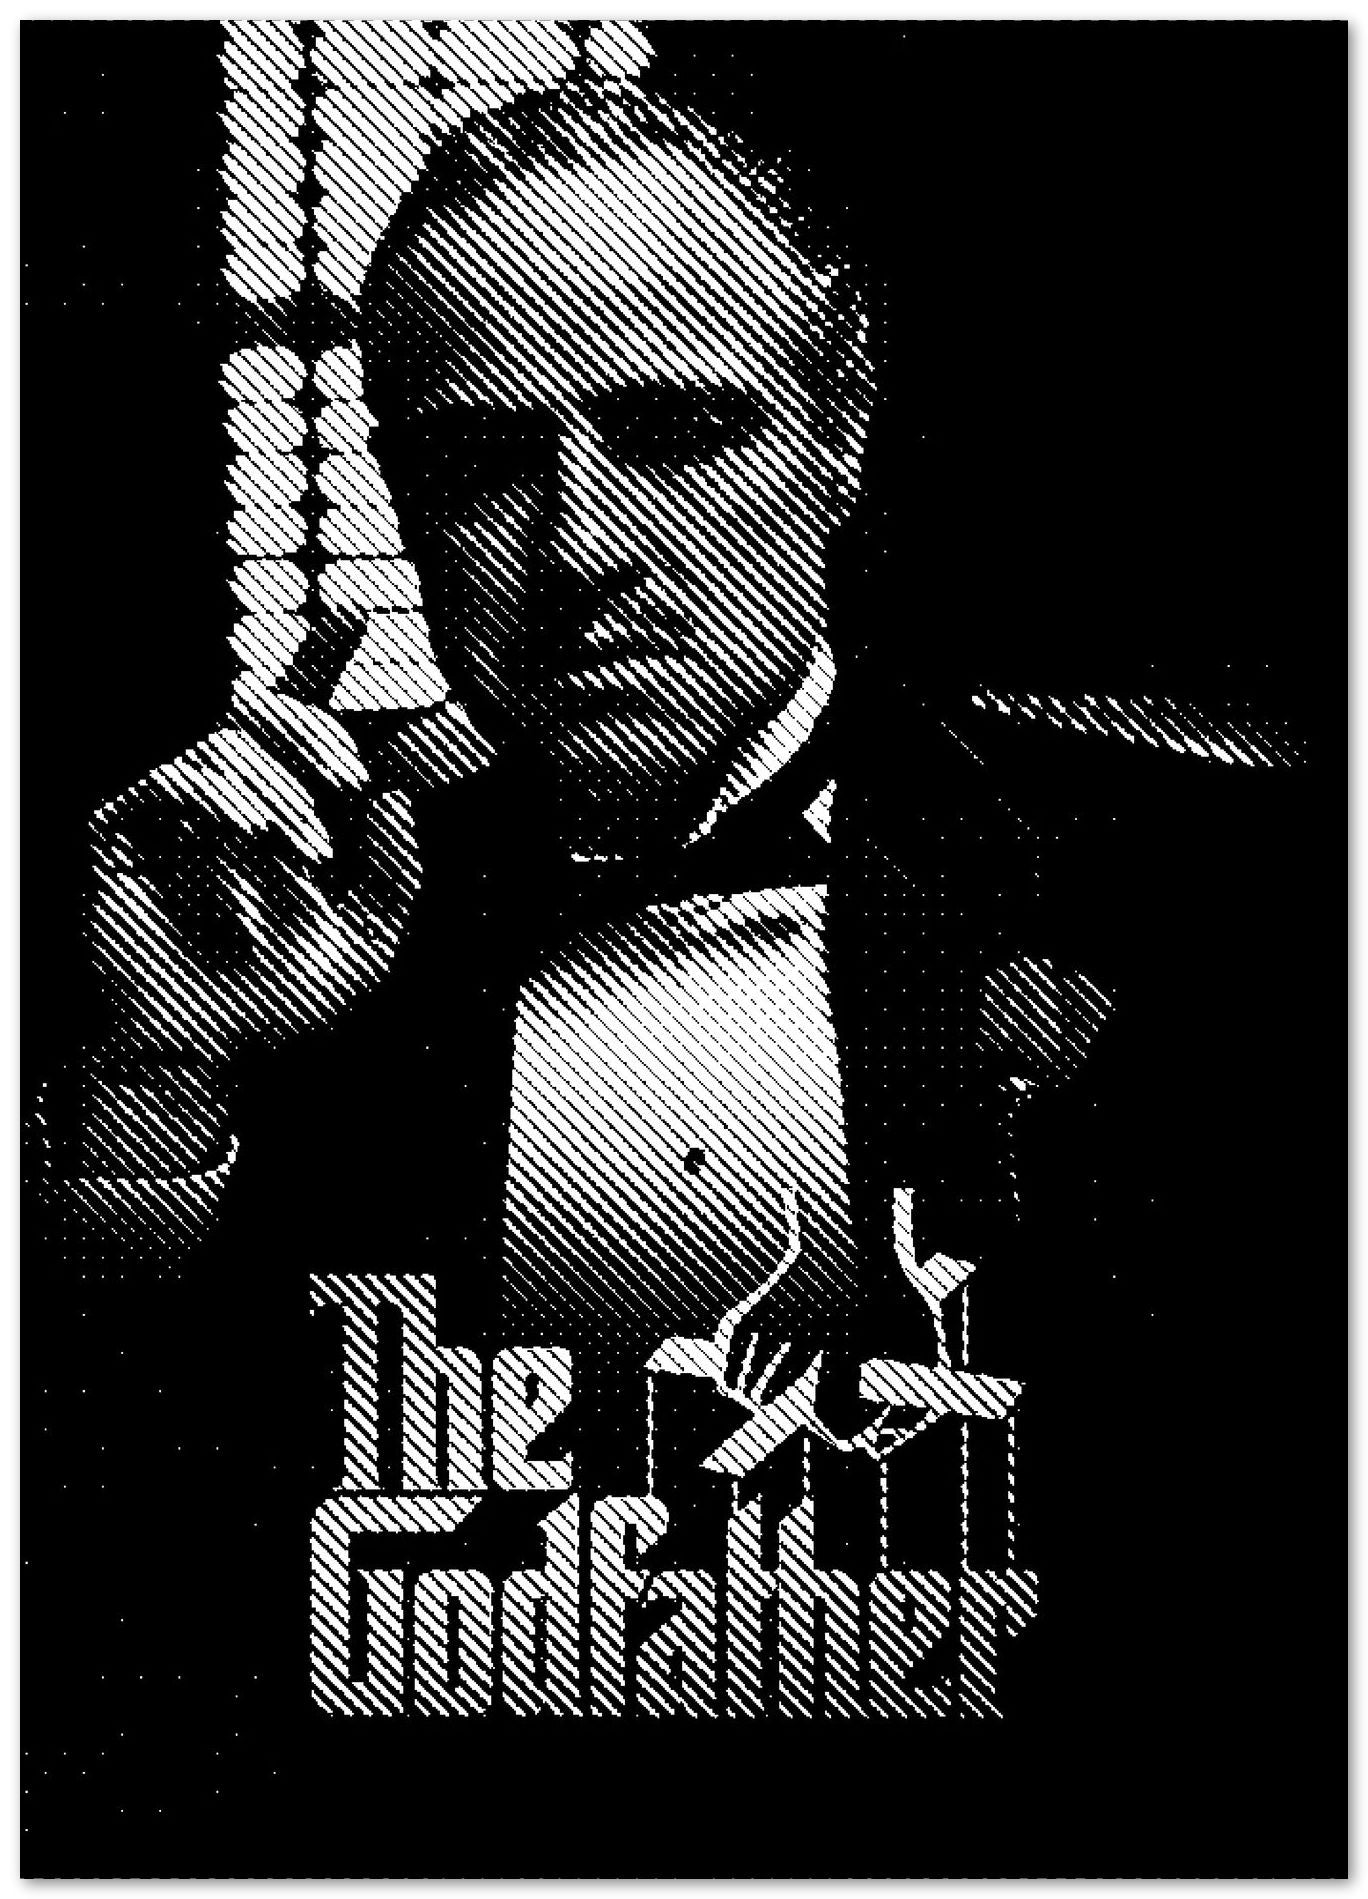 The Godfather - @Vecto